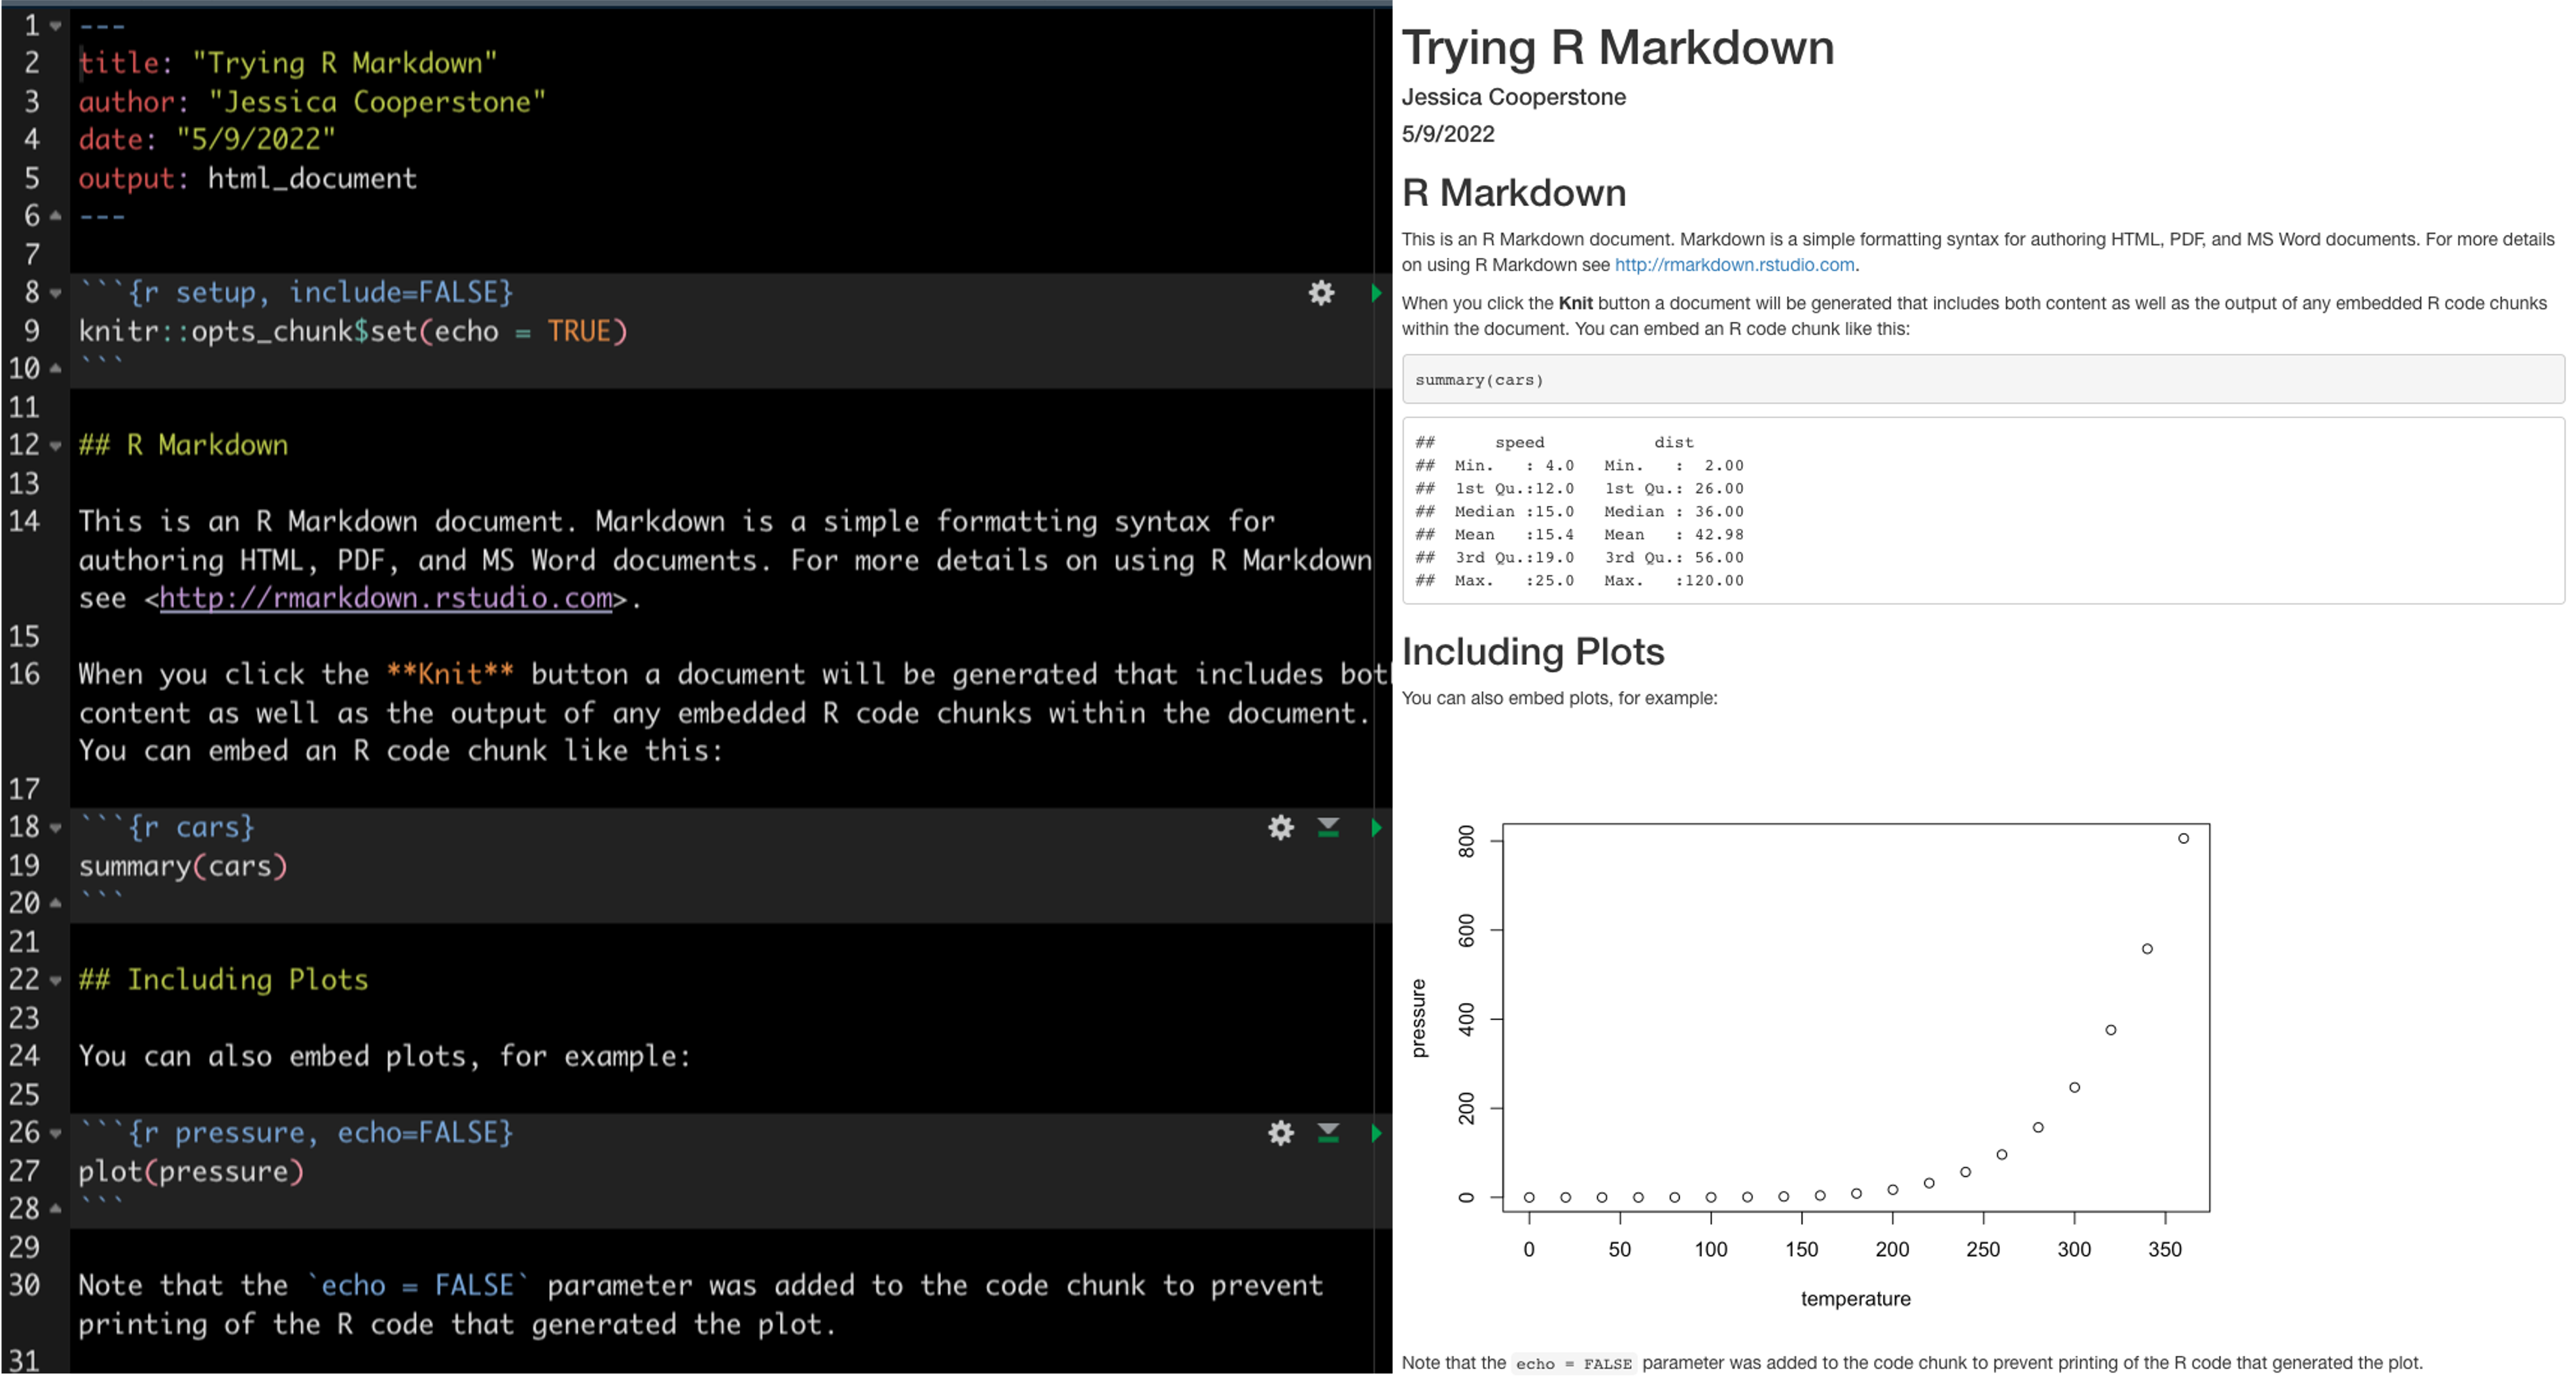 A screenshot of the template R Markdown file opened in RStudio on the left, and the same document knitted as a html on the right.